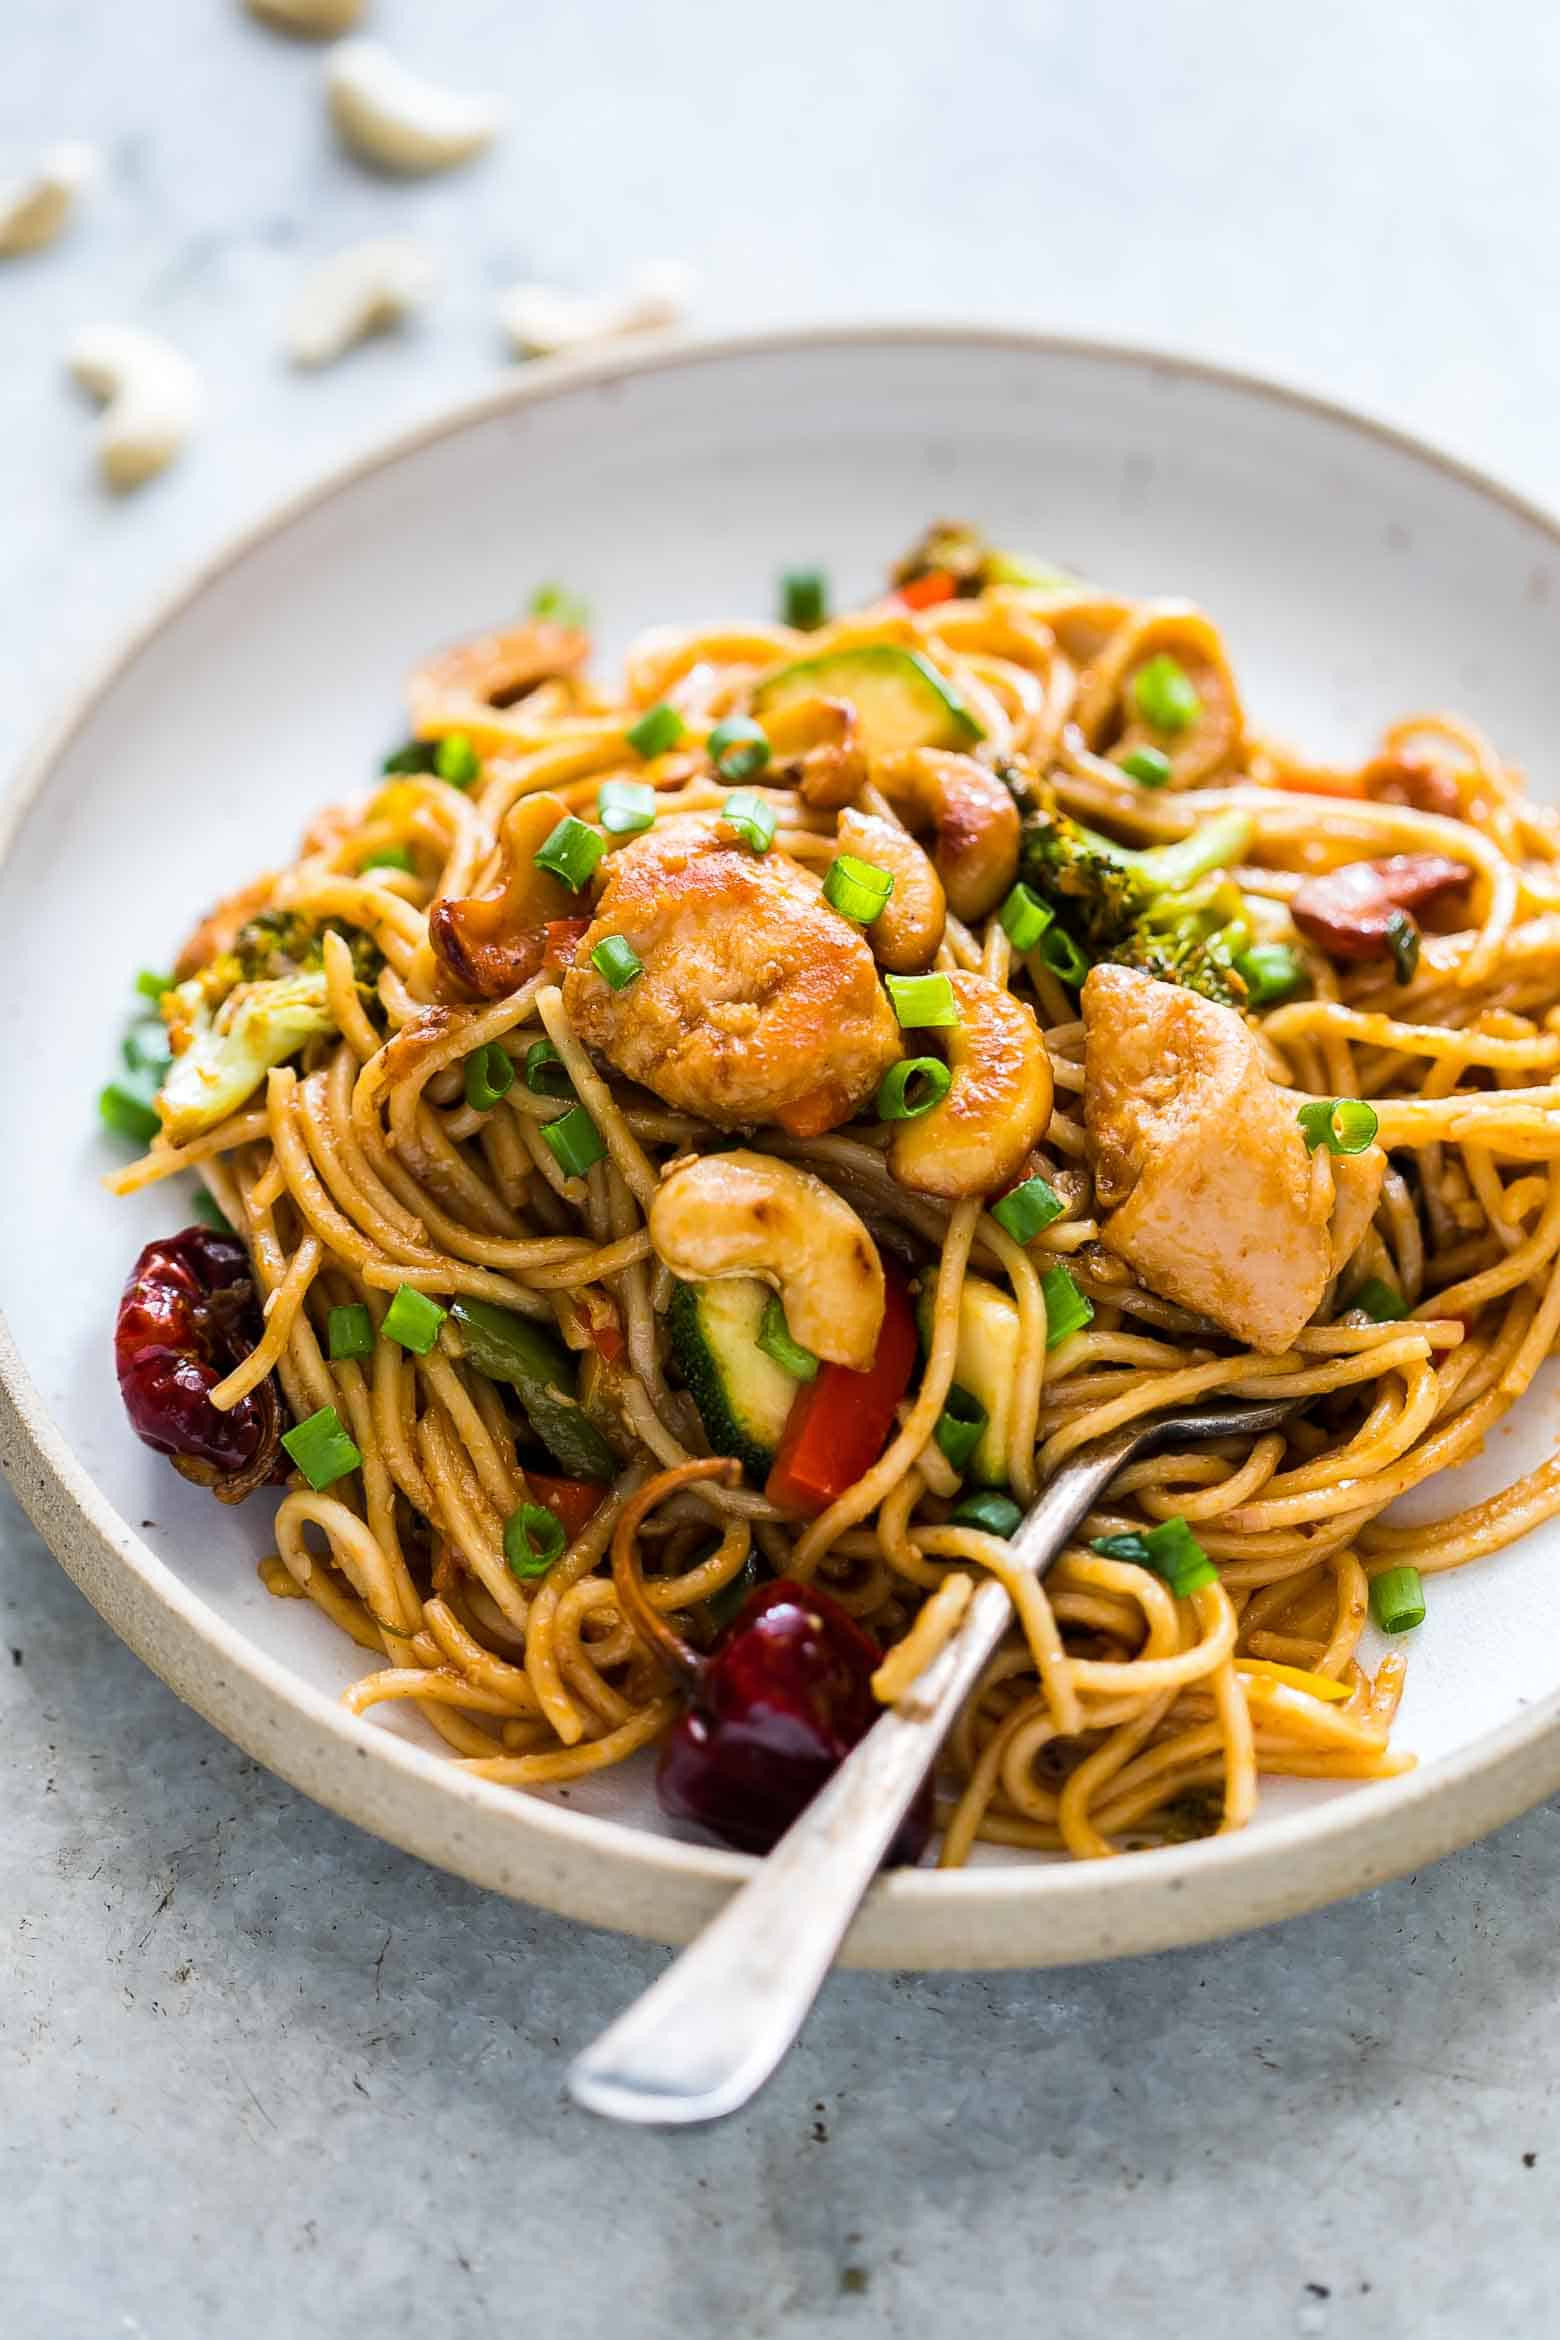 Asian Noodle Stir Fry Recipes
 Chinese Cashew Chicken Noodles Stir Fry Under 30 minutes